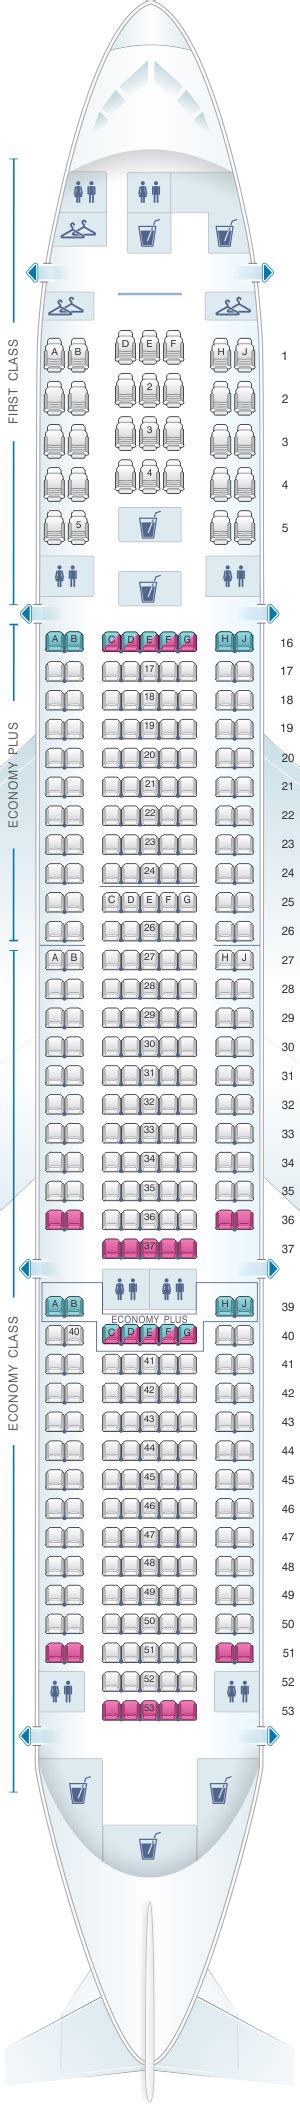 Your guide to United seat maps and fleet information, ... All Seats: AC Power: No: Boeing 777-200 (772) Layout 1 : 31: 18: Standard: On-Demand TV: All Seats ... . 